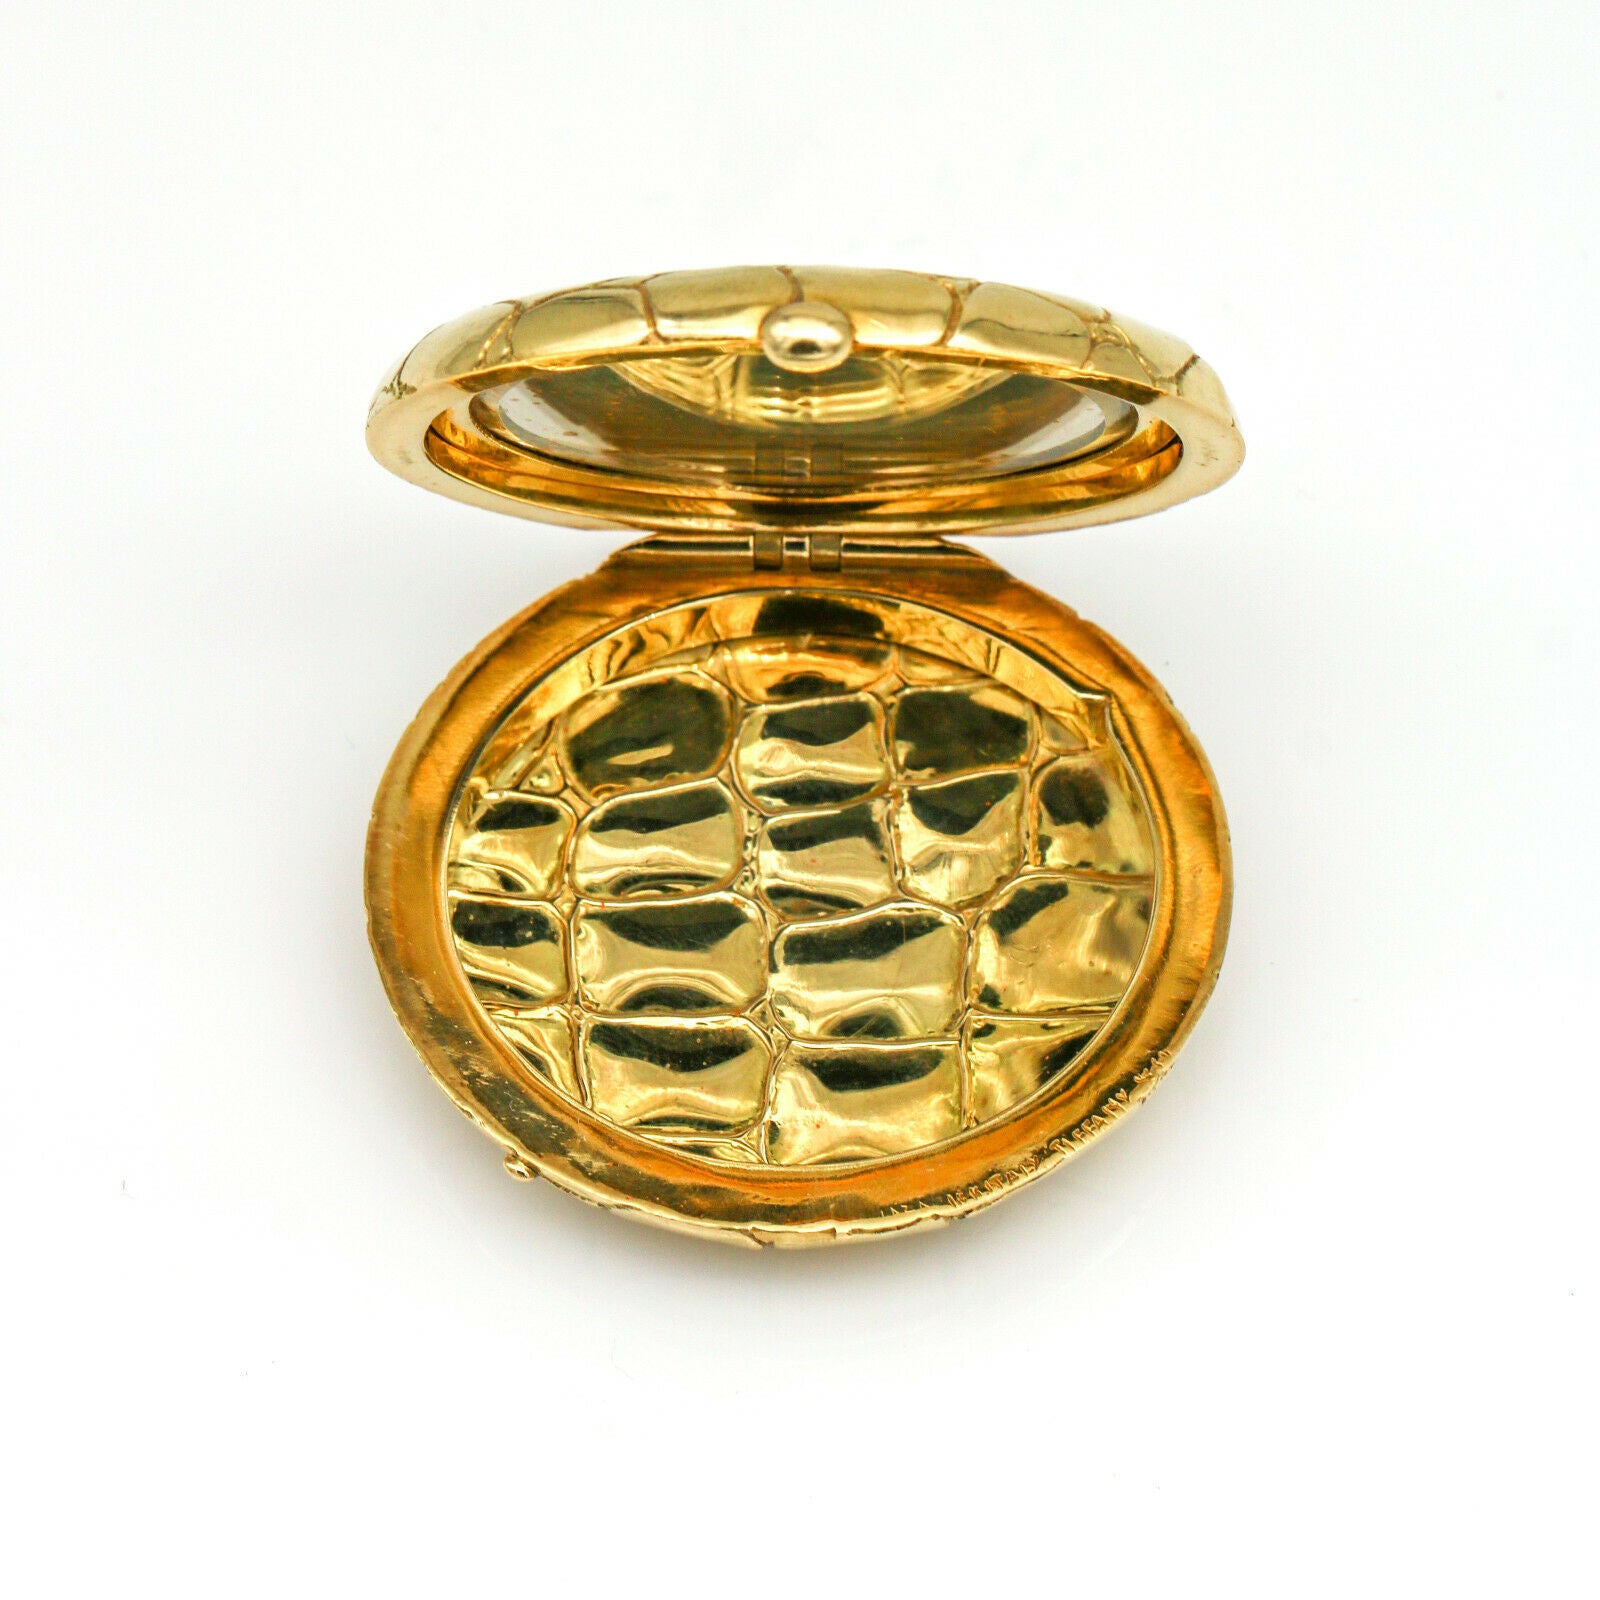 Tiffany & Co. Alligator Textured Compact in 18k Yellow Gold Vintage